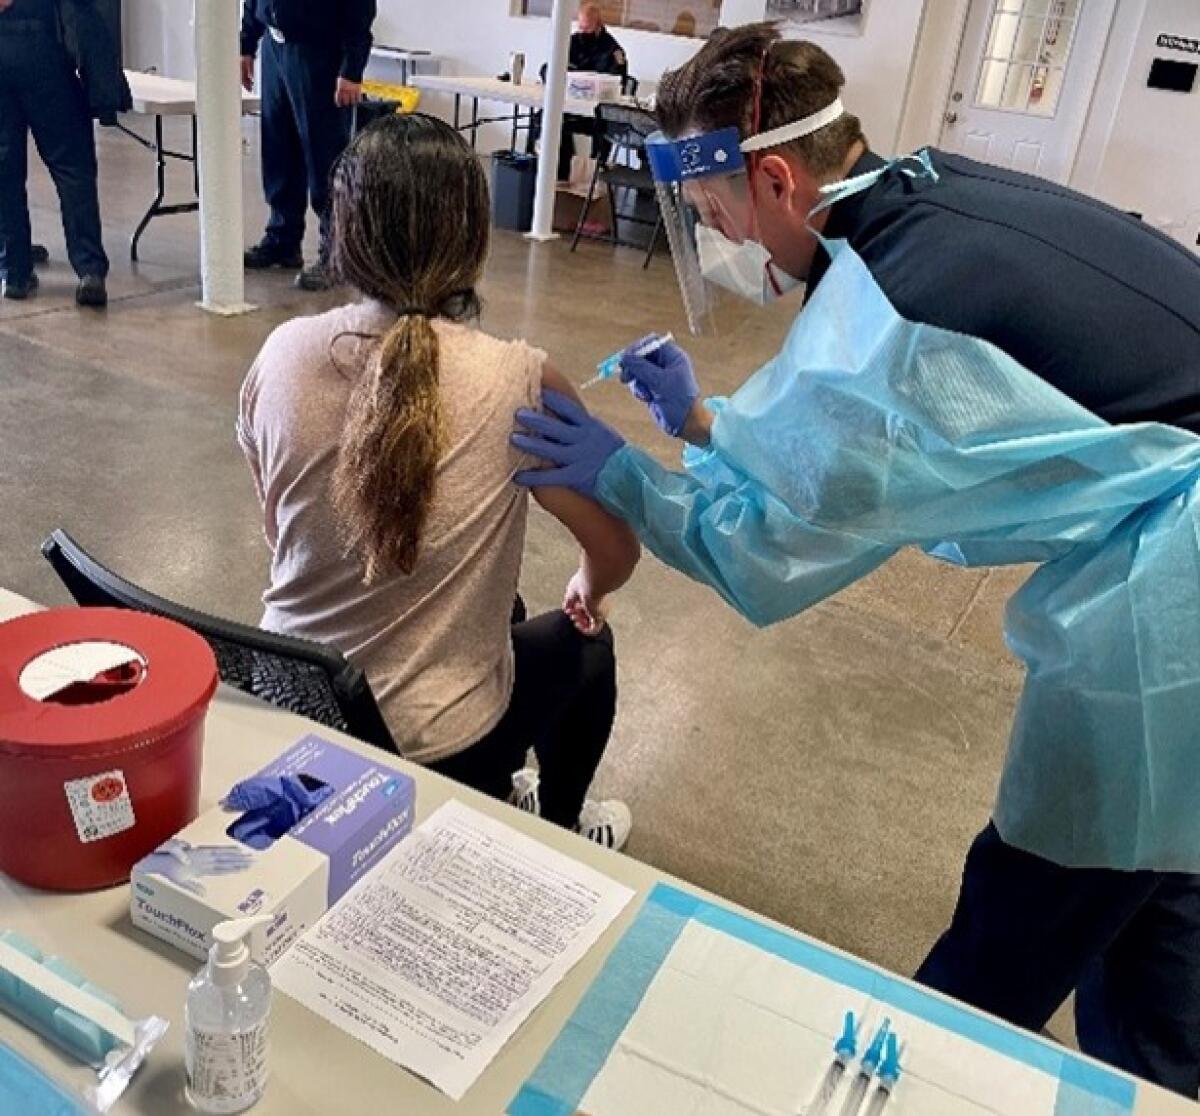 An Encinitas firefighter preparing to give a vaccine.